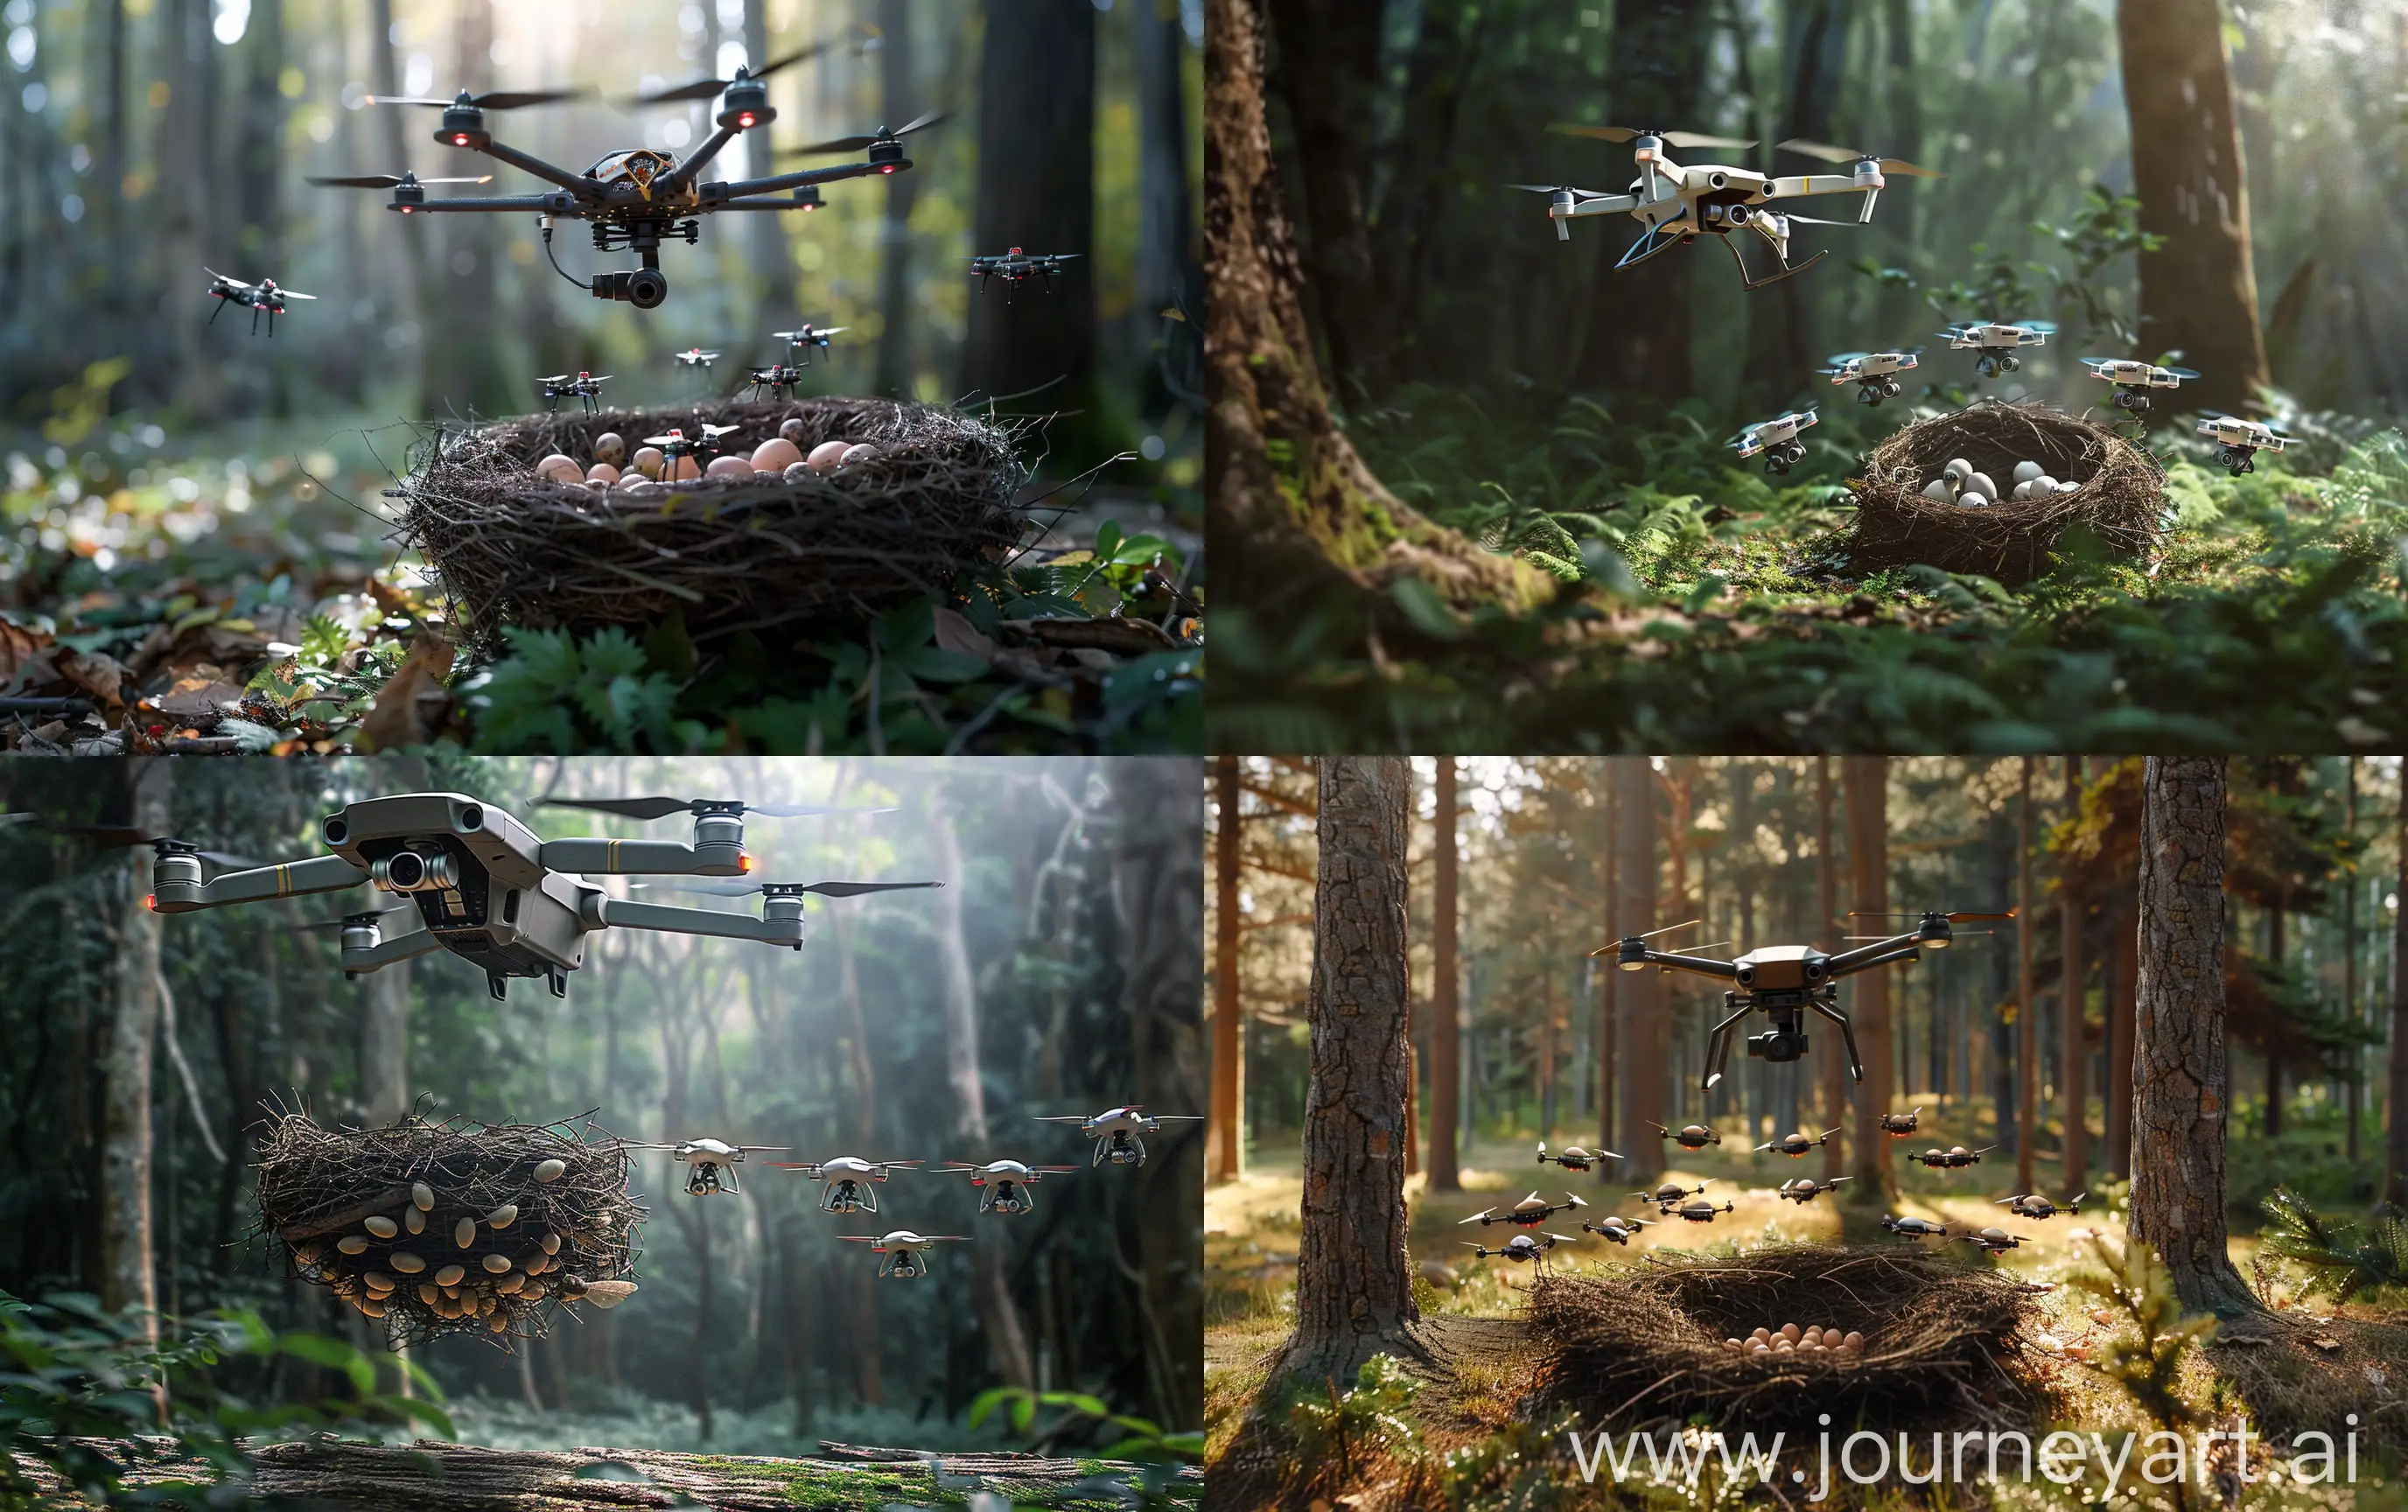 Drone-Observes-Newly-Hatched-Drone-Nest-in-Realistic-Forest-Scene